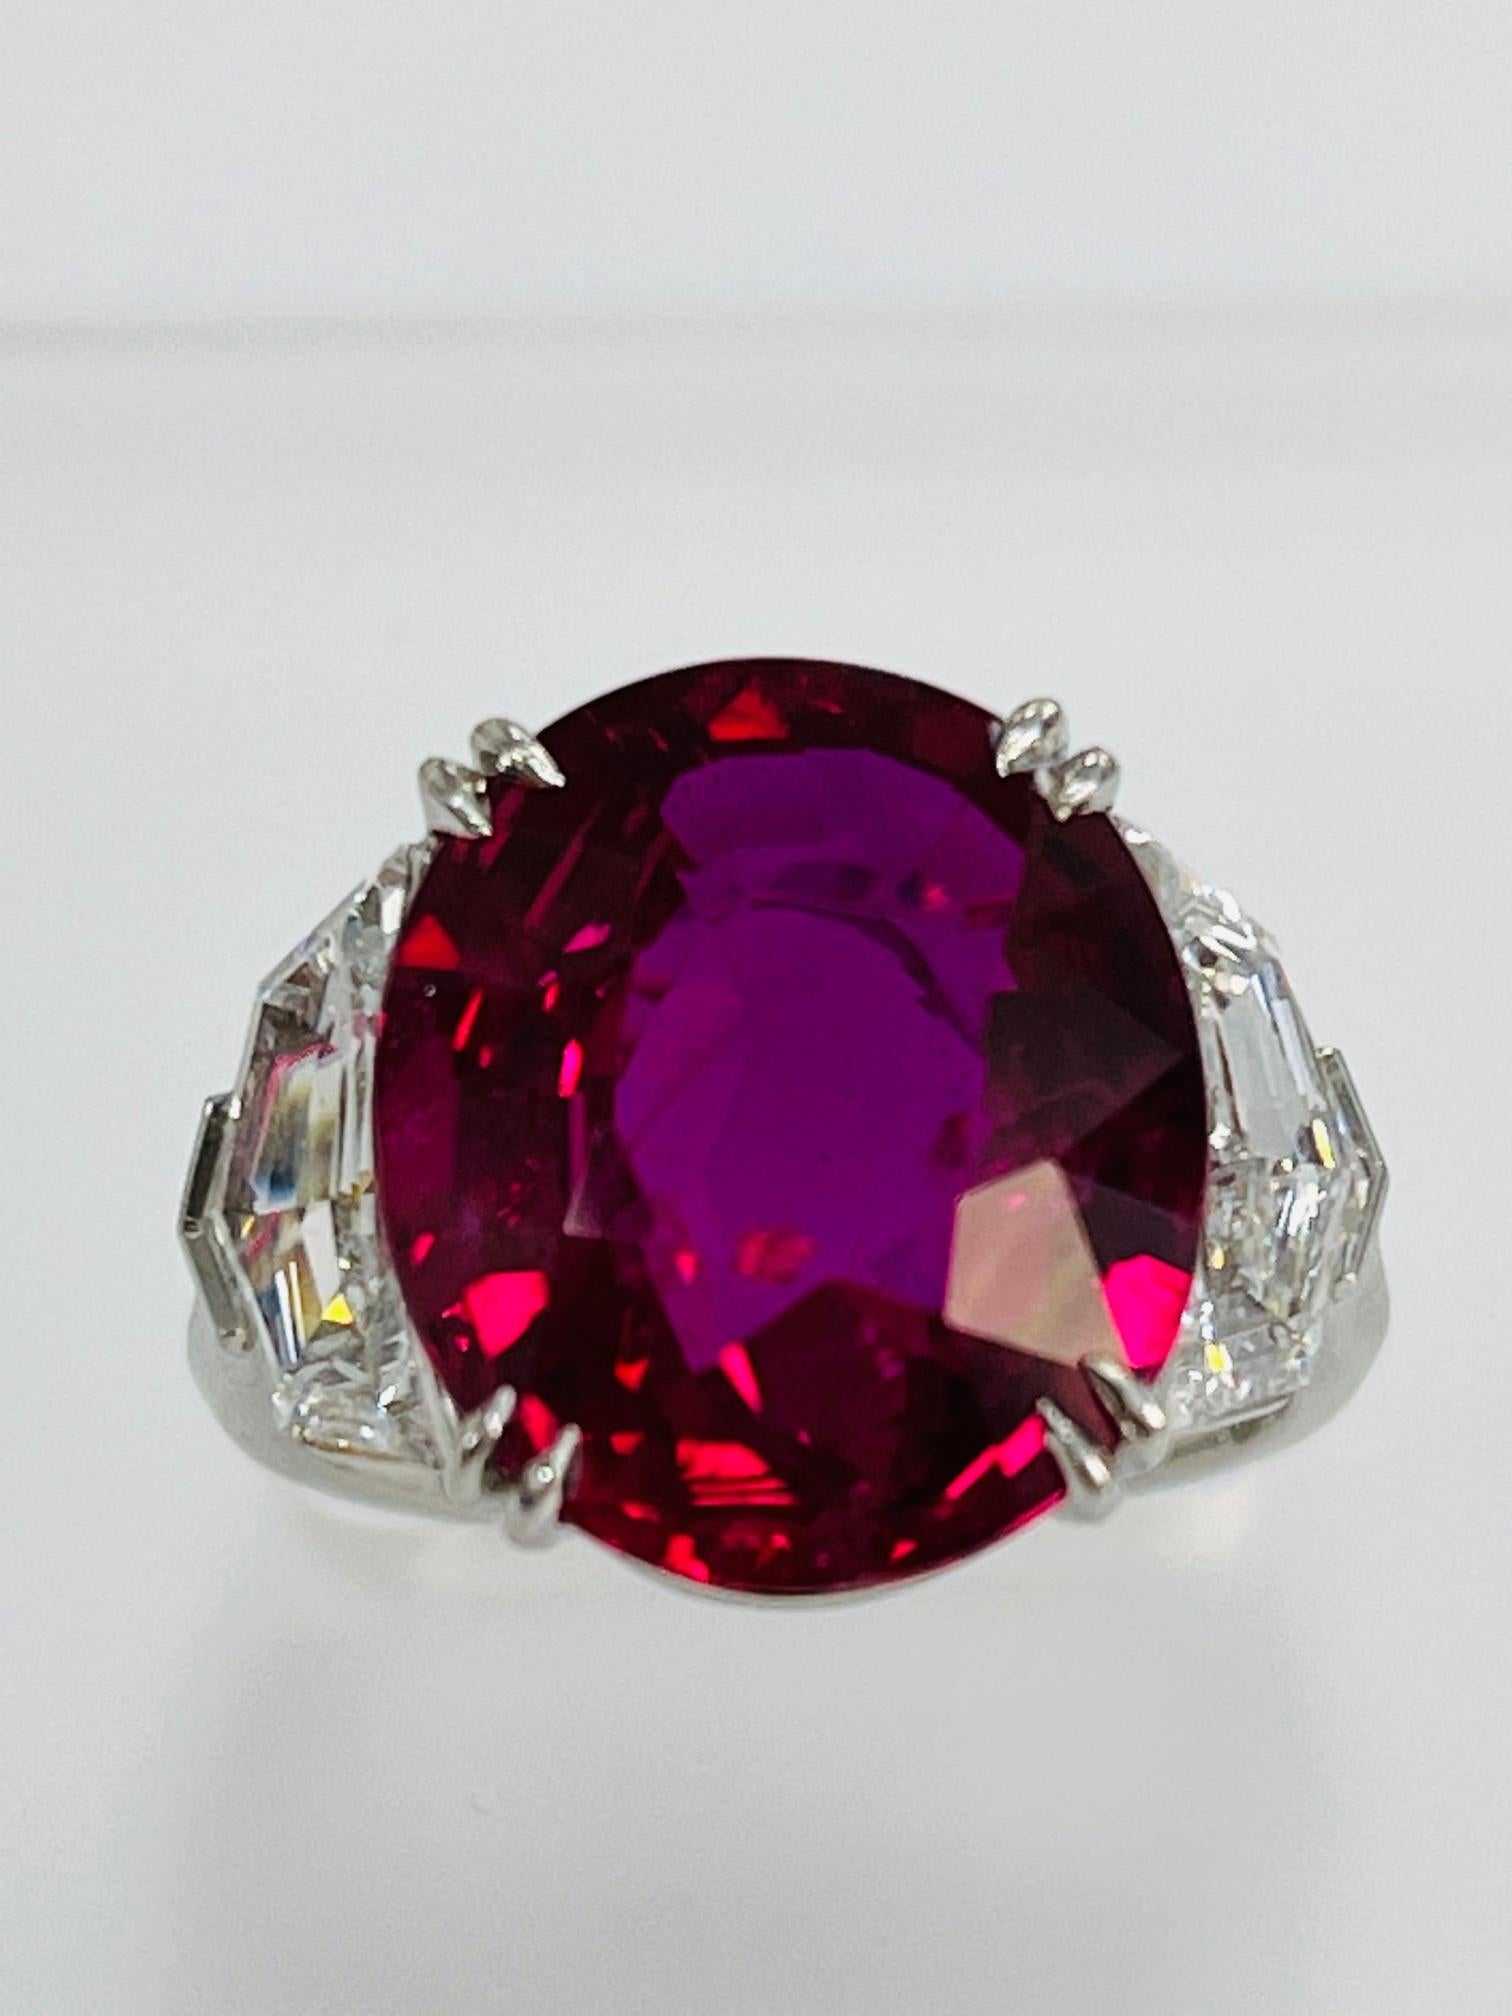 
10.06 Carat oval ruby , Mozambique , GIA certified , Heat , set in hand made paltinum ring with 1.90 carat fancy cut 